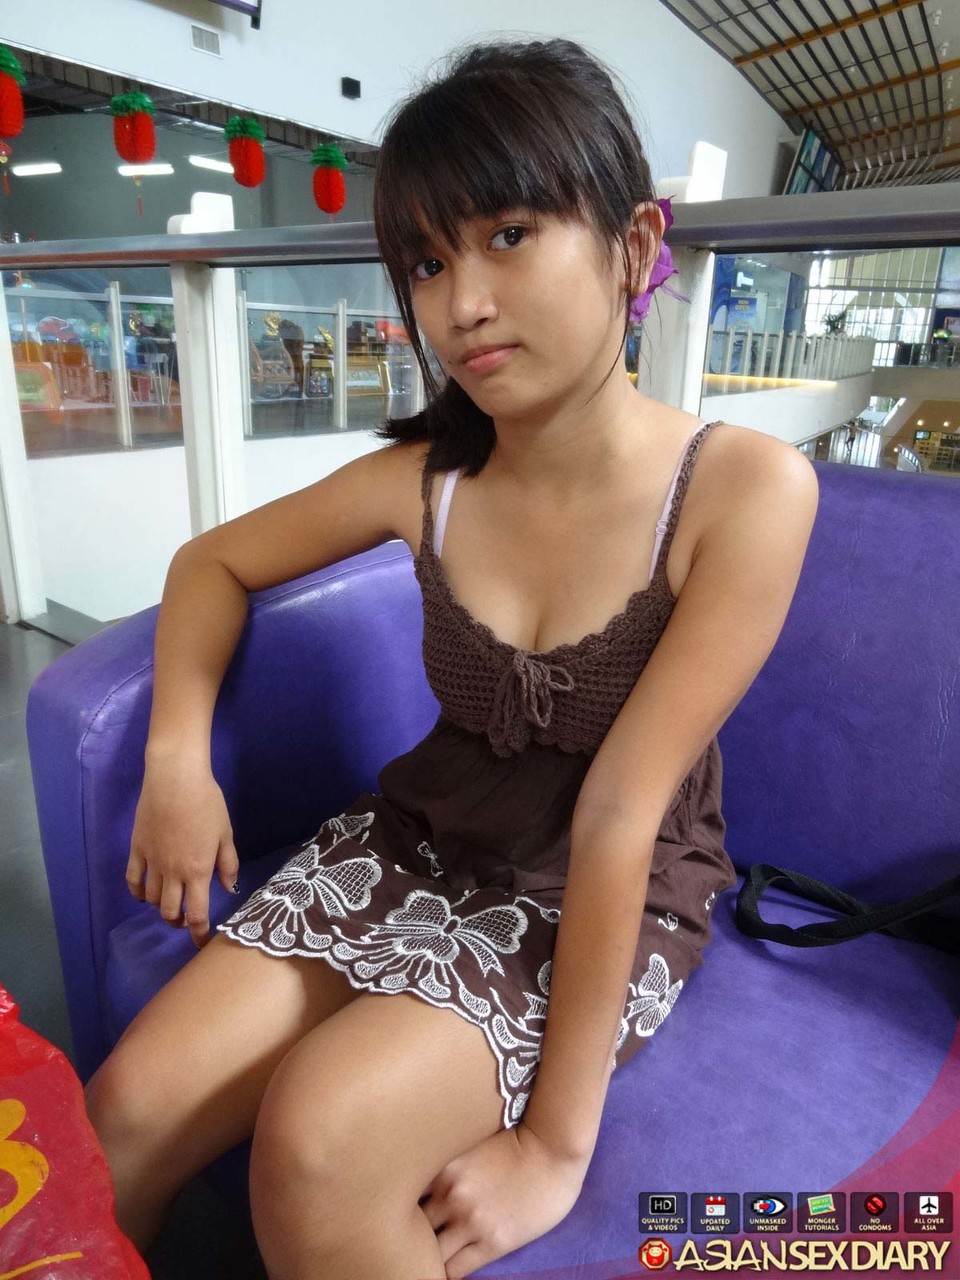 Petite Asian girl Menchie gets naked before having POV sexual relations foto pornográfica #422641351 | Asian Sex Diary Pics, Menchie, Asian, pornografia móvel